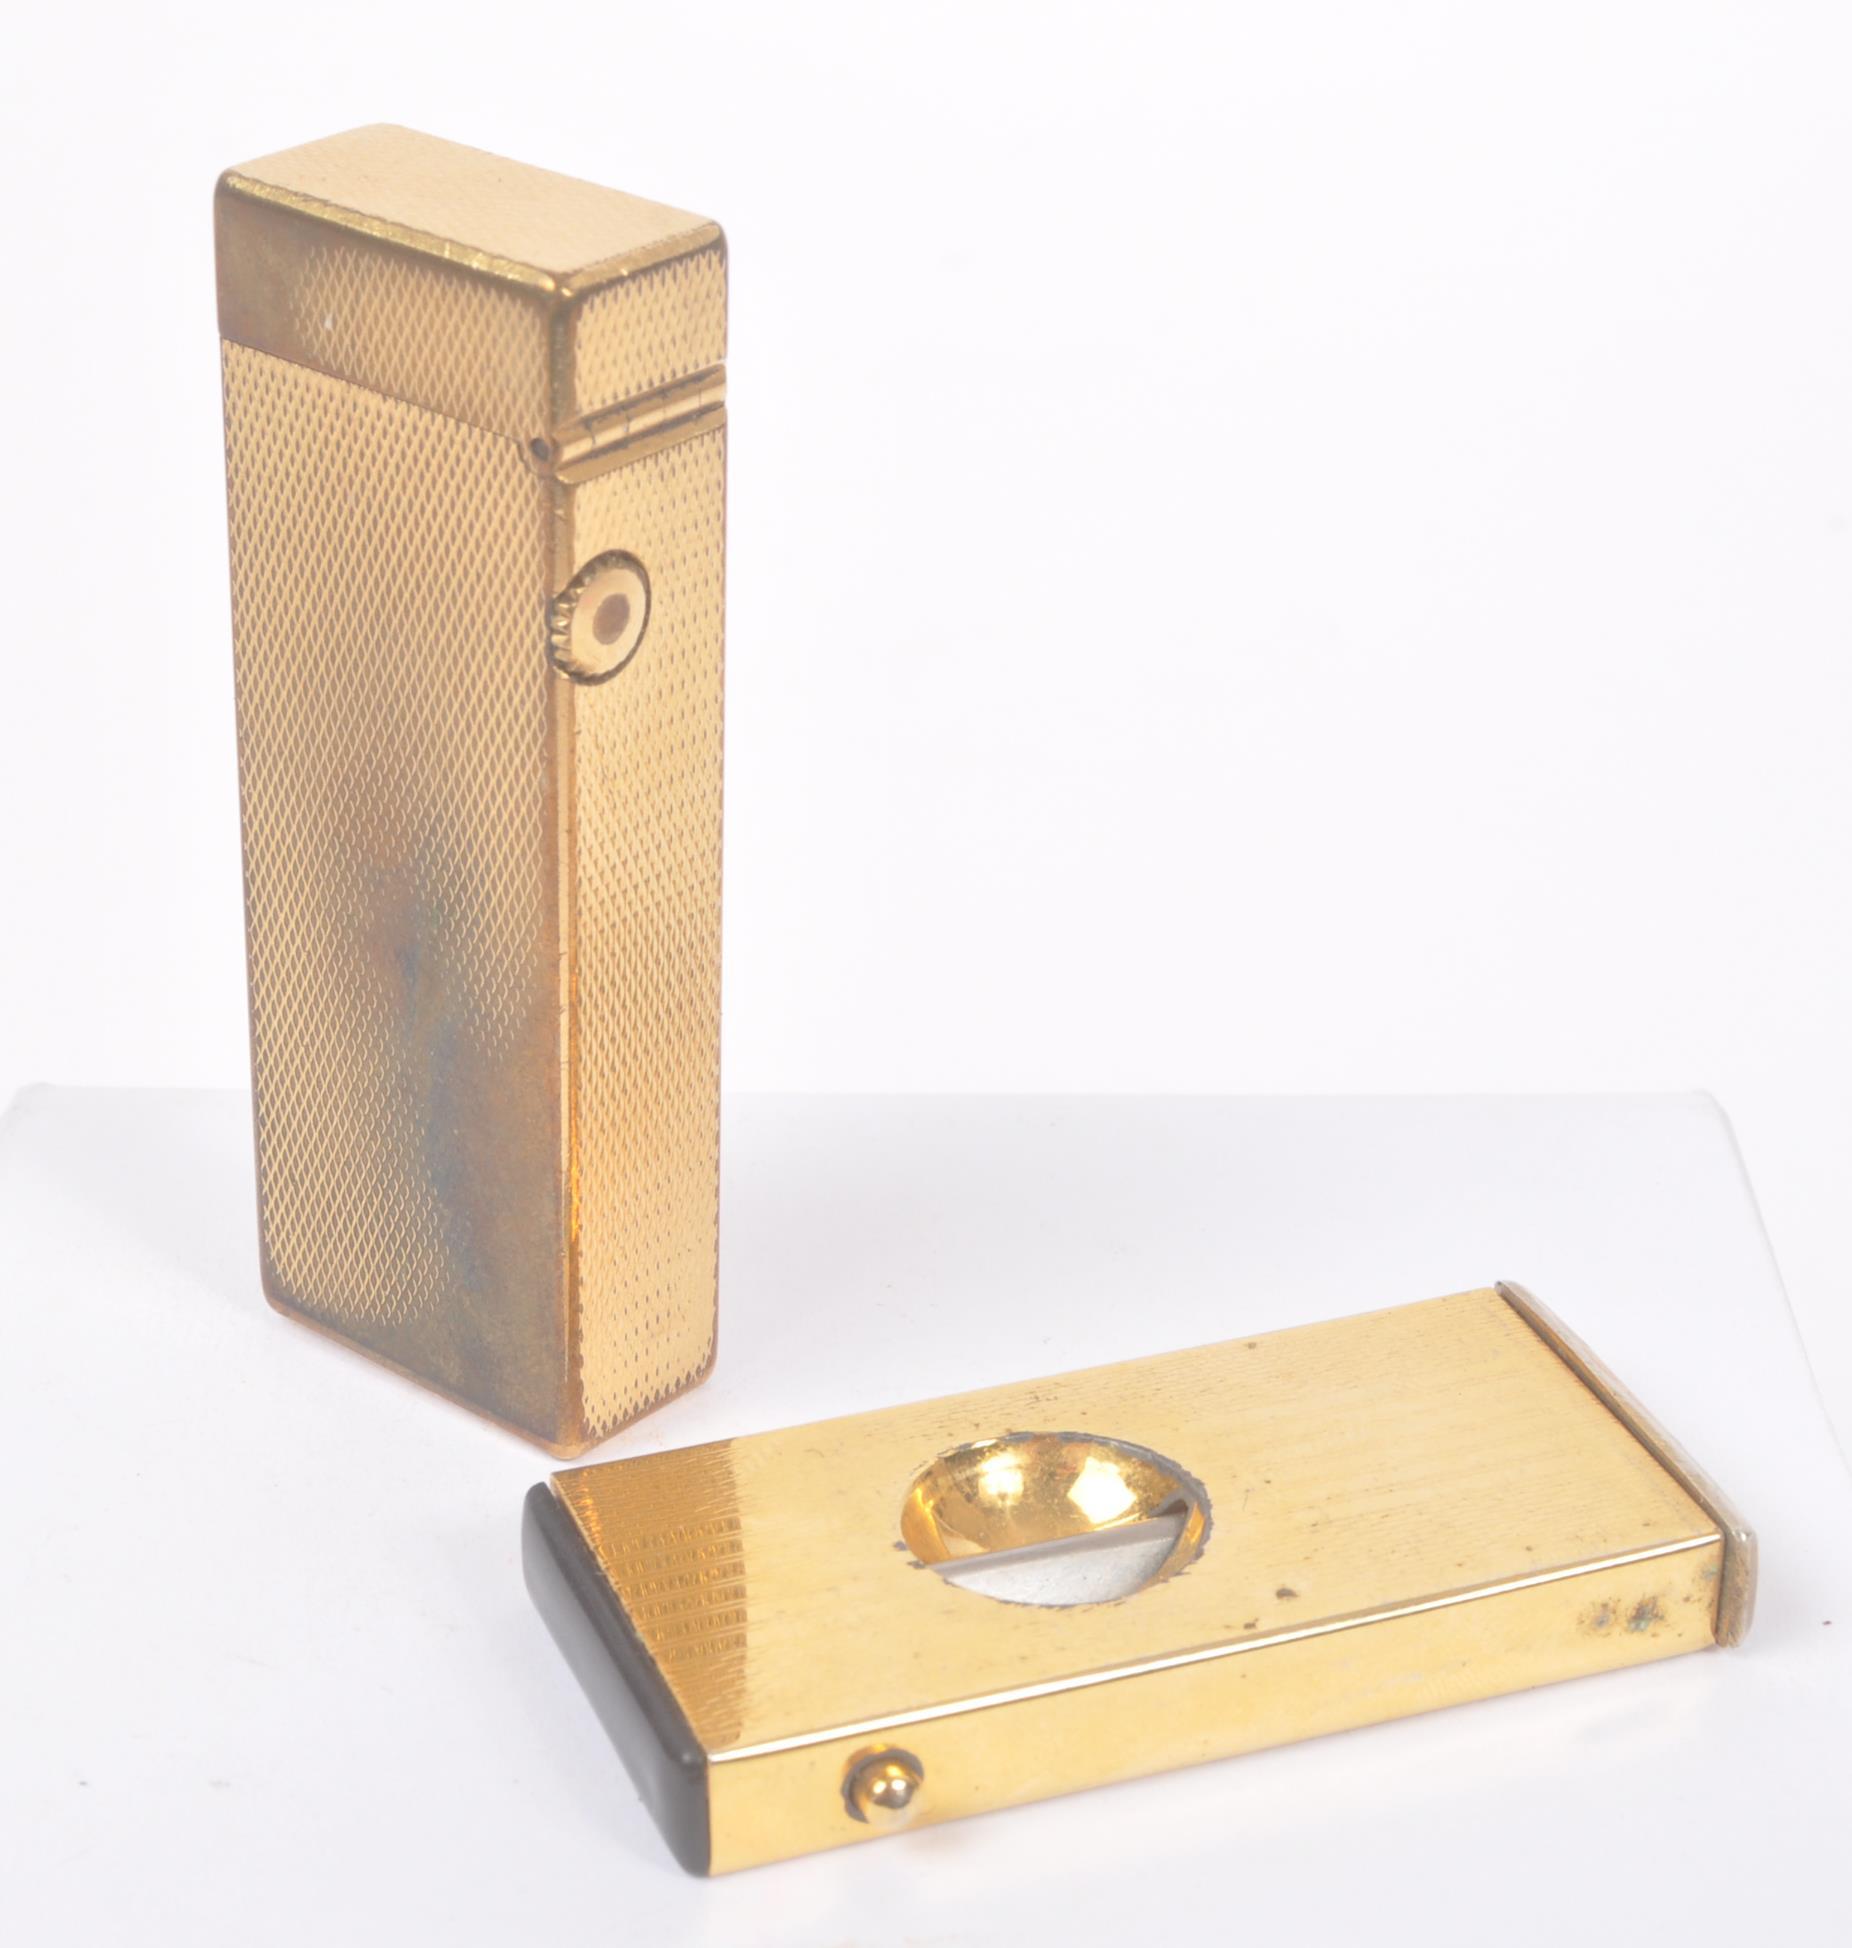 DUNHILL - 20TH CENTURY SWISS CIGARETTE LIGHTER - Image 3 of 5